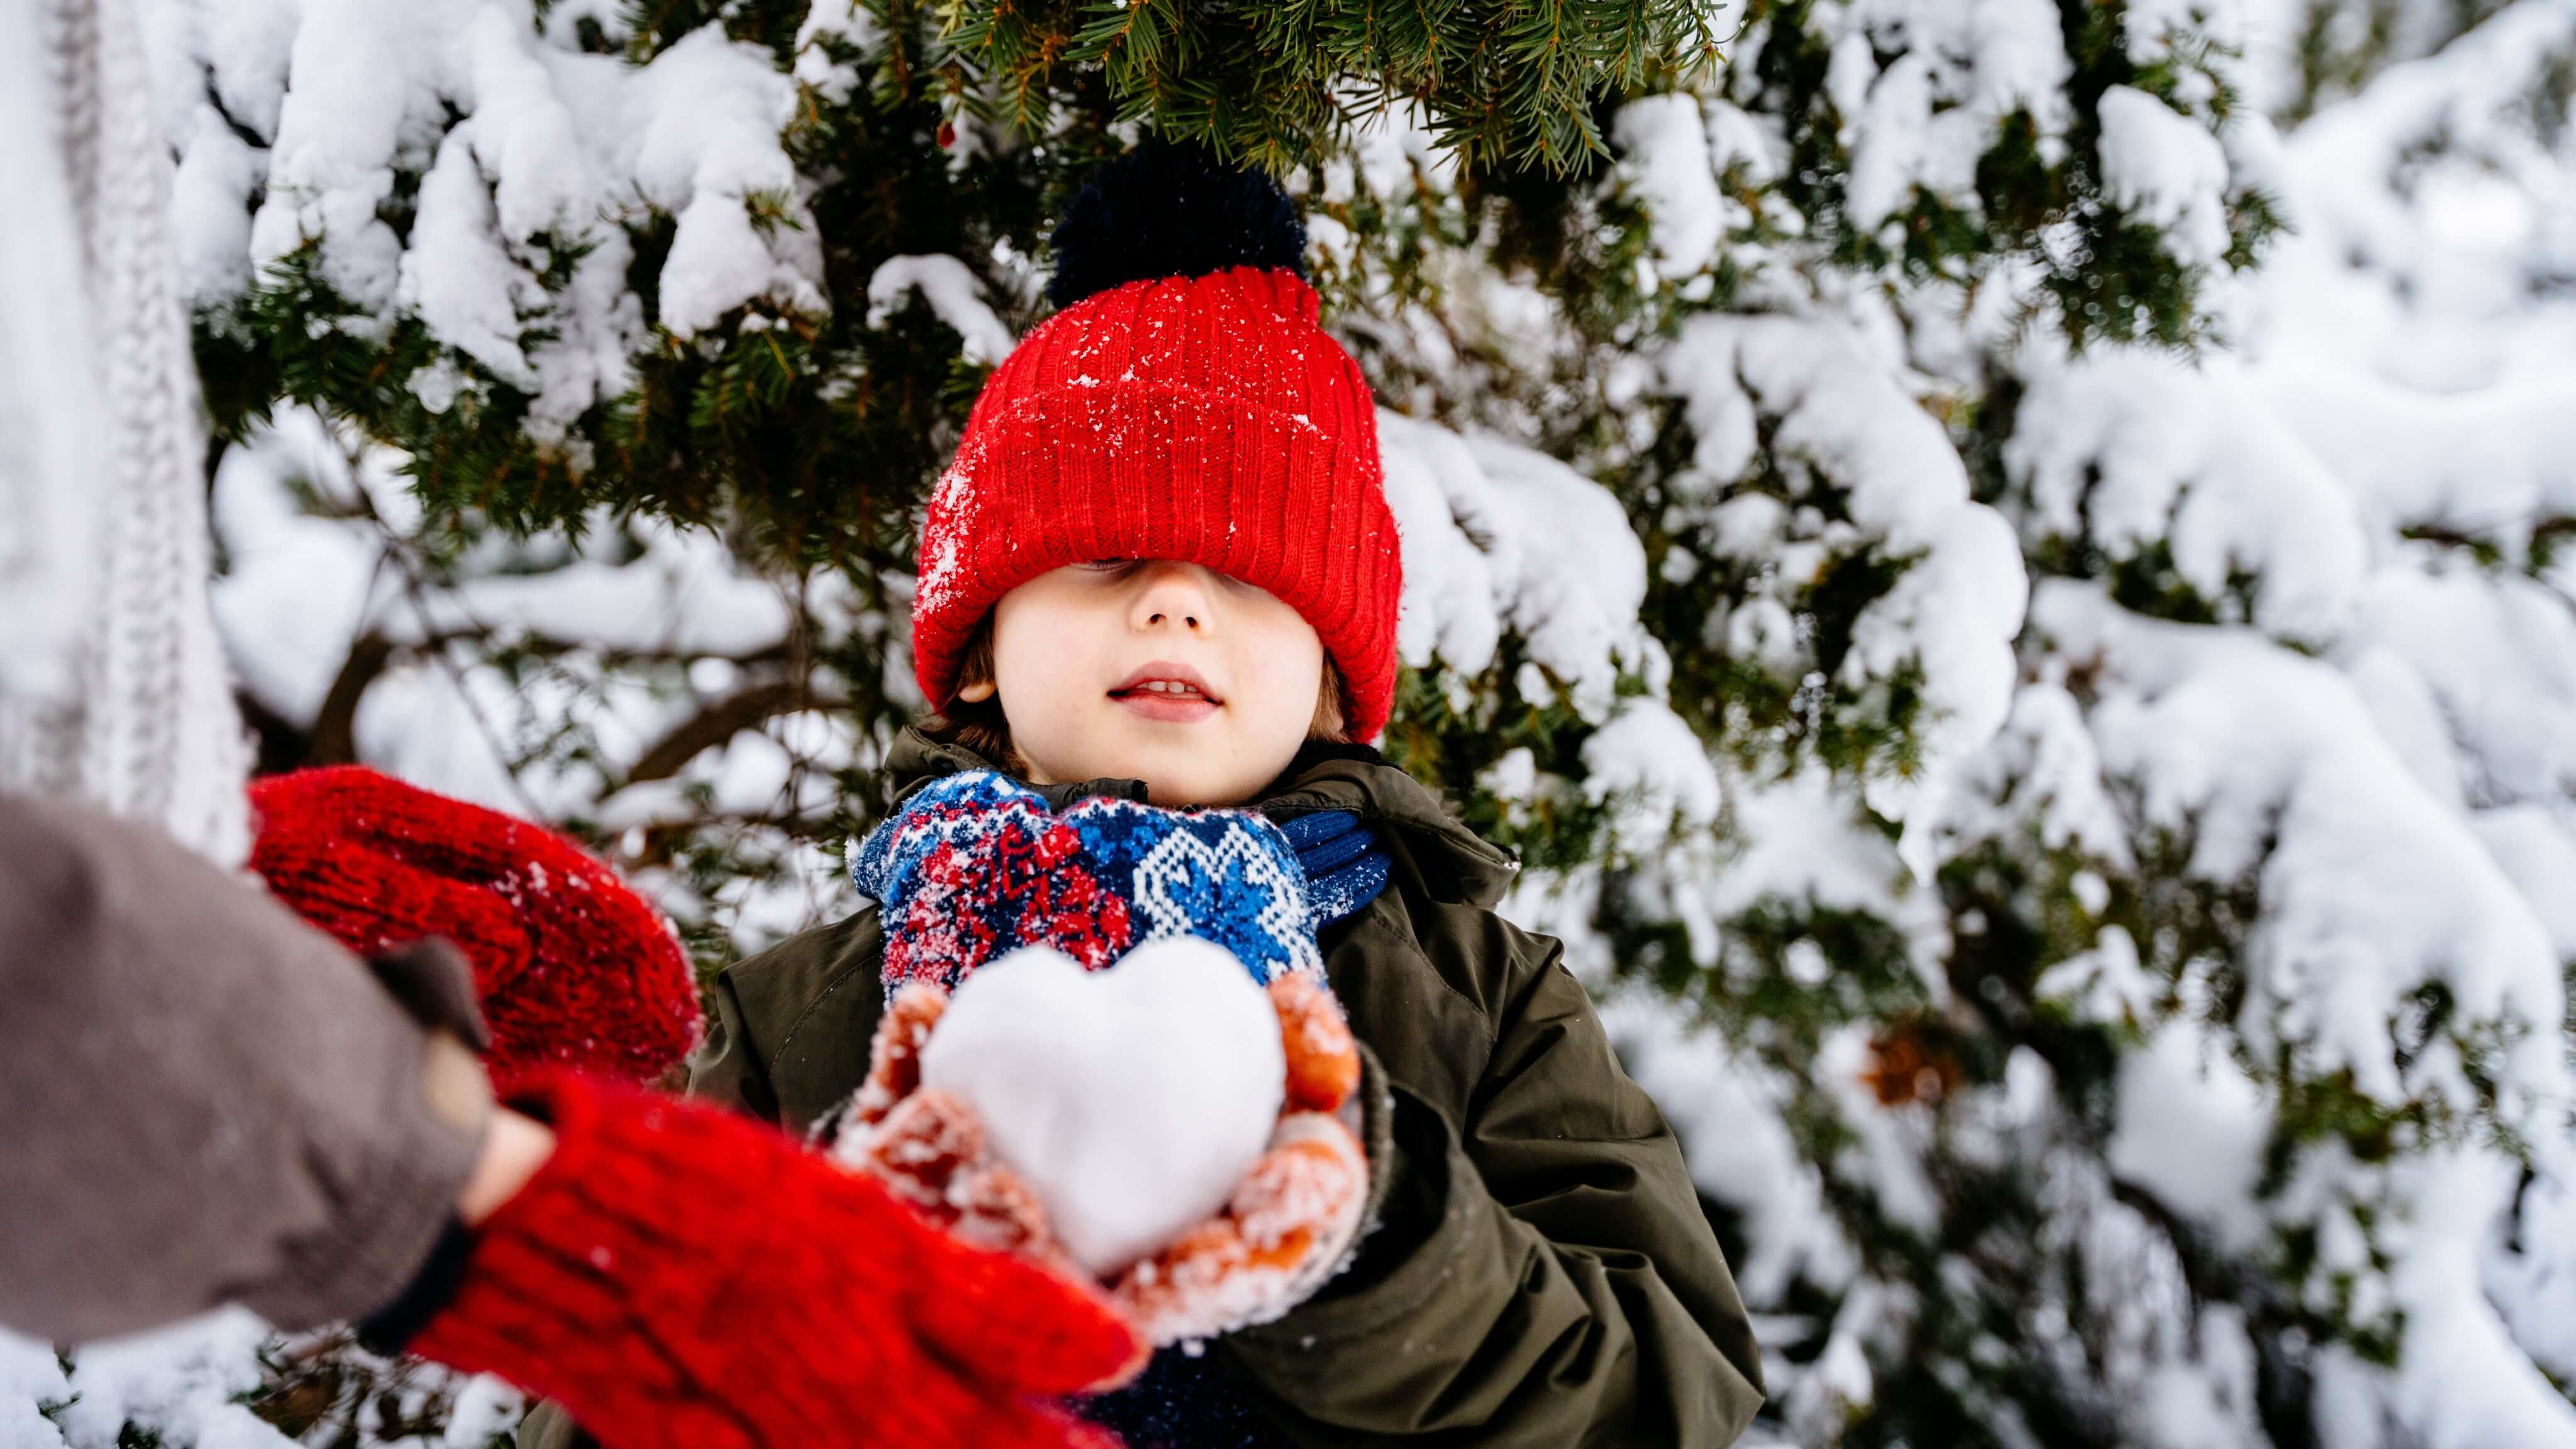 Image of Hat, Glove, Cap, Face, Head, Person, Photography, Portrait, Outdoors, Nature, Baby, Coat, Tree, Jacket, 